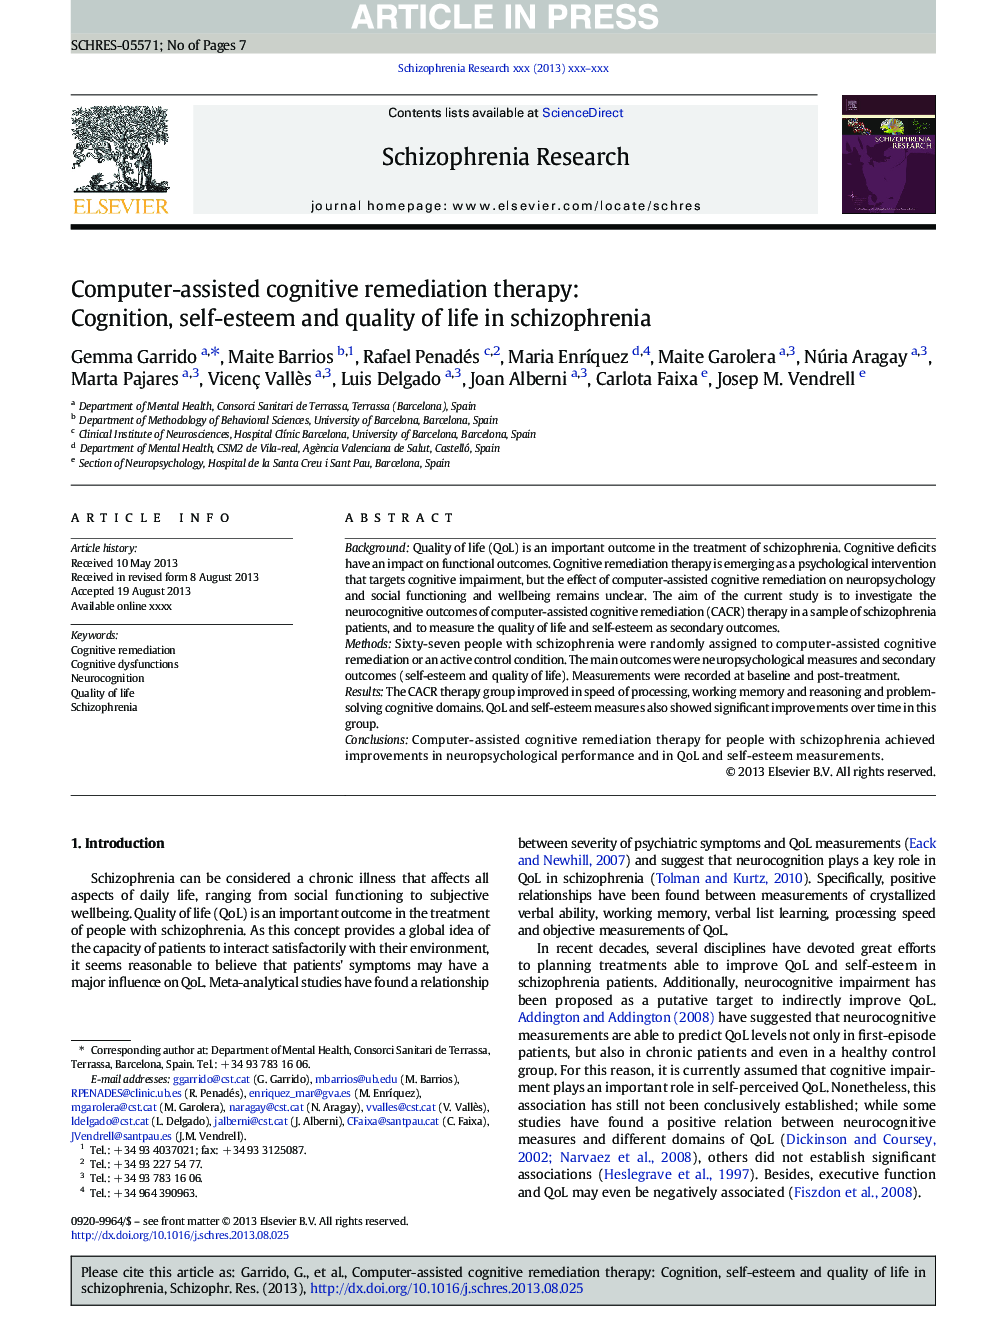 Computer-assisted cognitive remediation therapy: Cognition, self-esteem and quality of life in schizophrenia